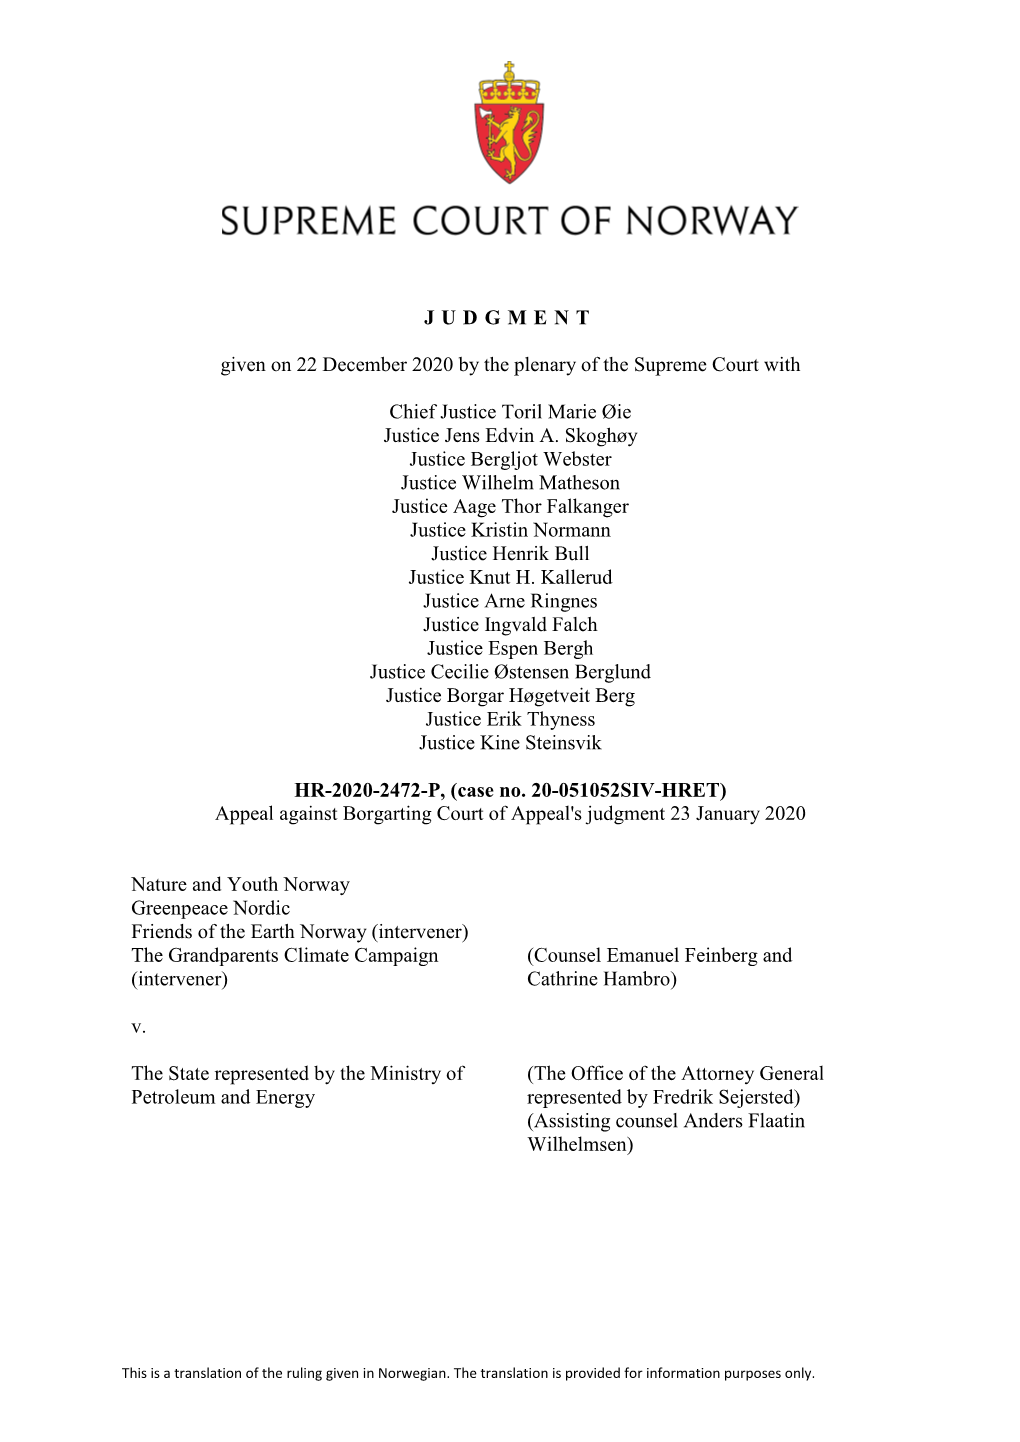 JUDGMENT Given on 22 December 2020 by the Plenary of the Supreme